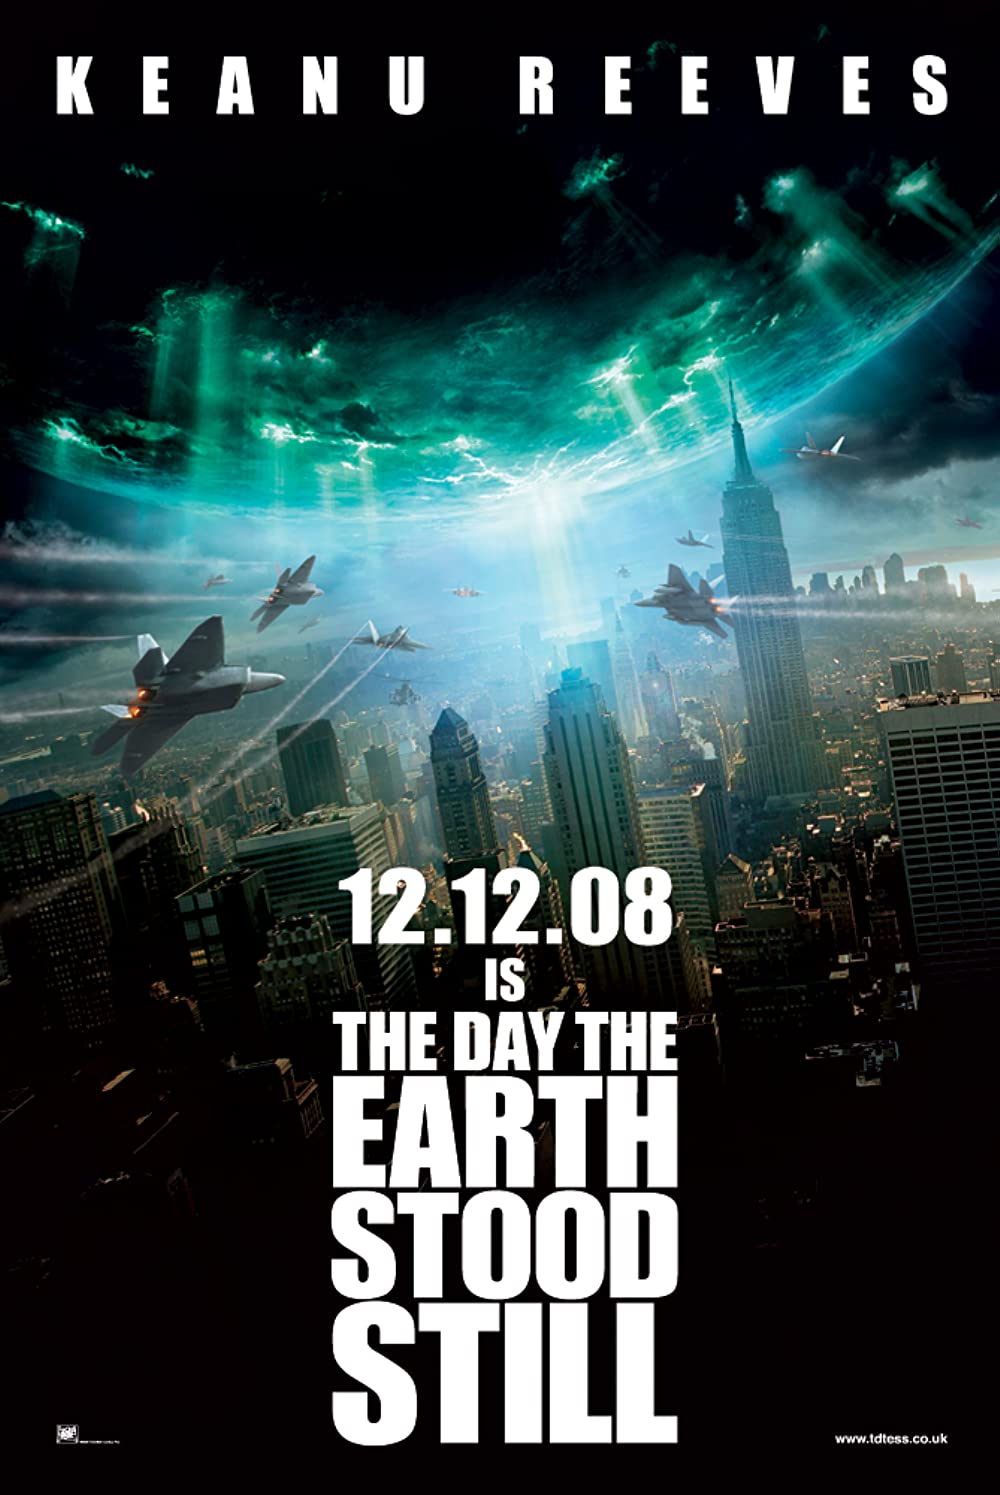 FULL MOVIE: The Day The Earth Stood Still (2008) [Sci-Fi]